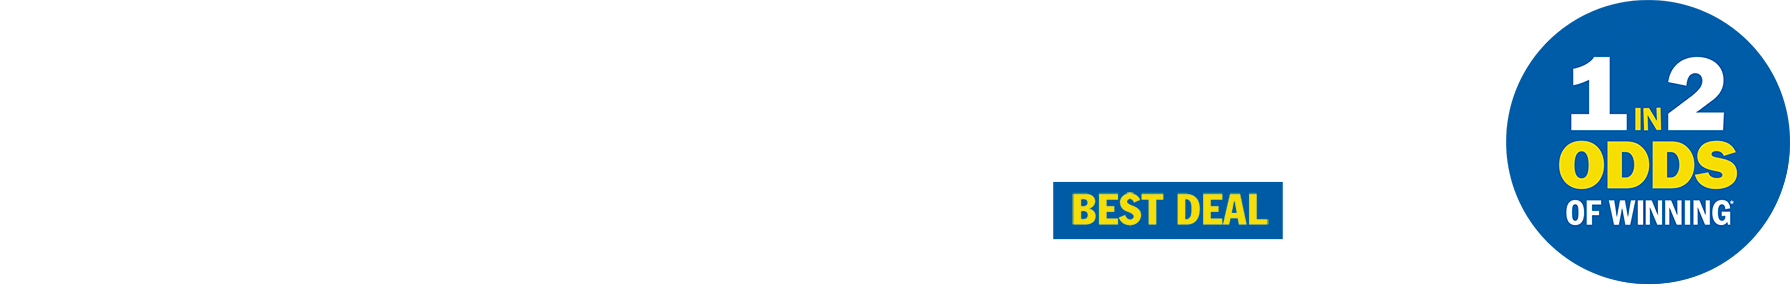 SickKids Lottery ticket pricing